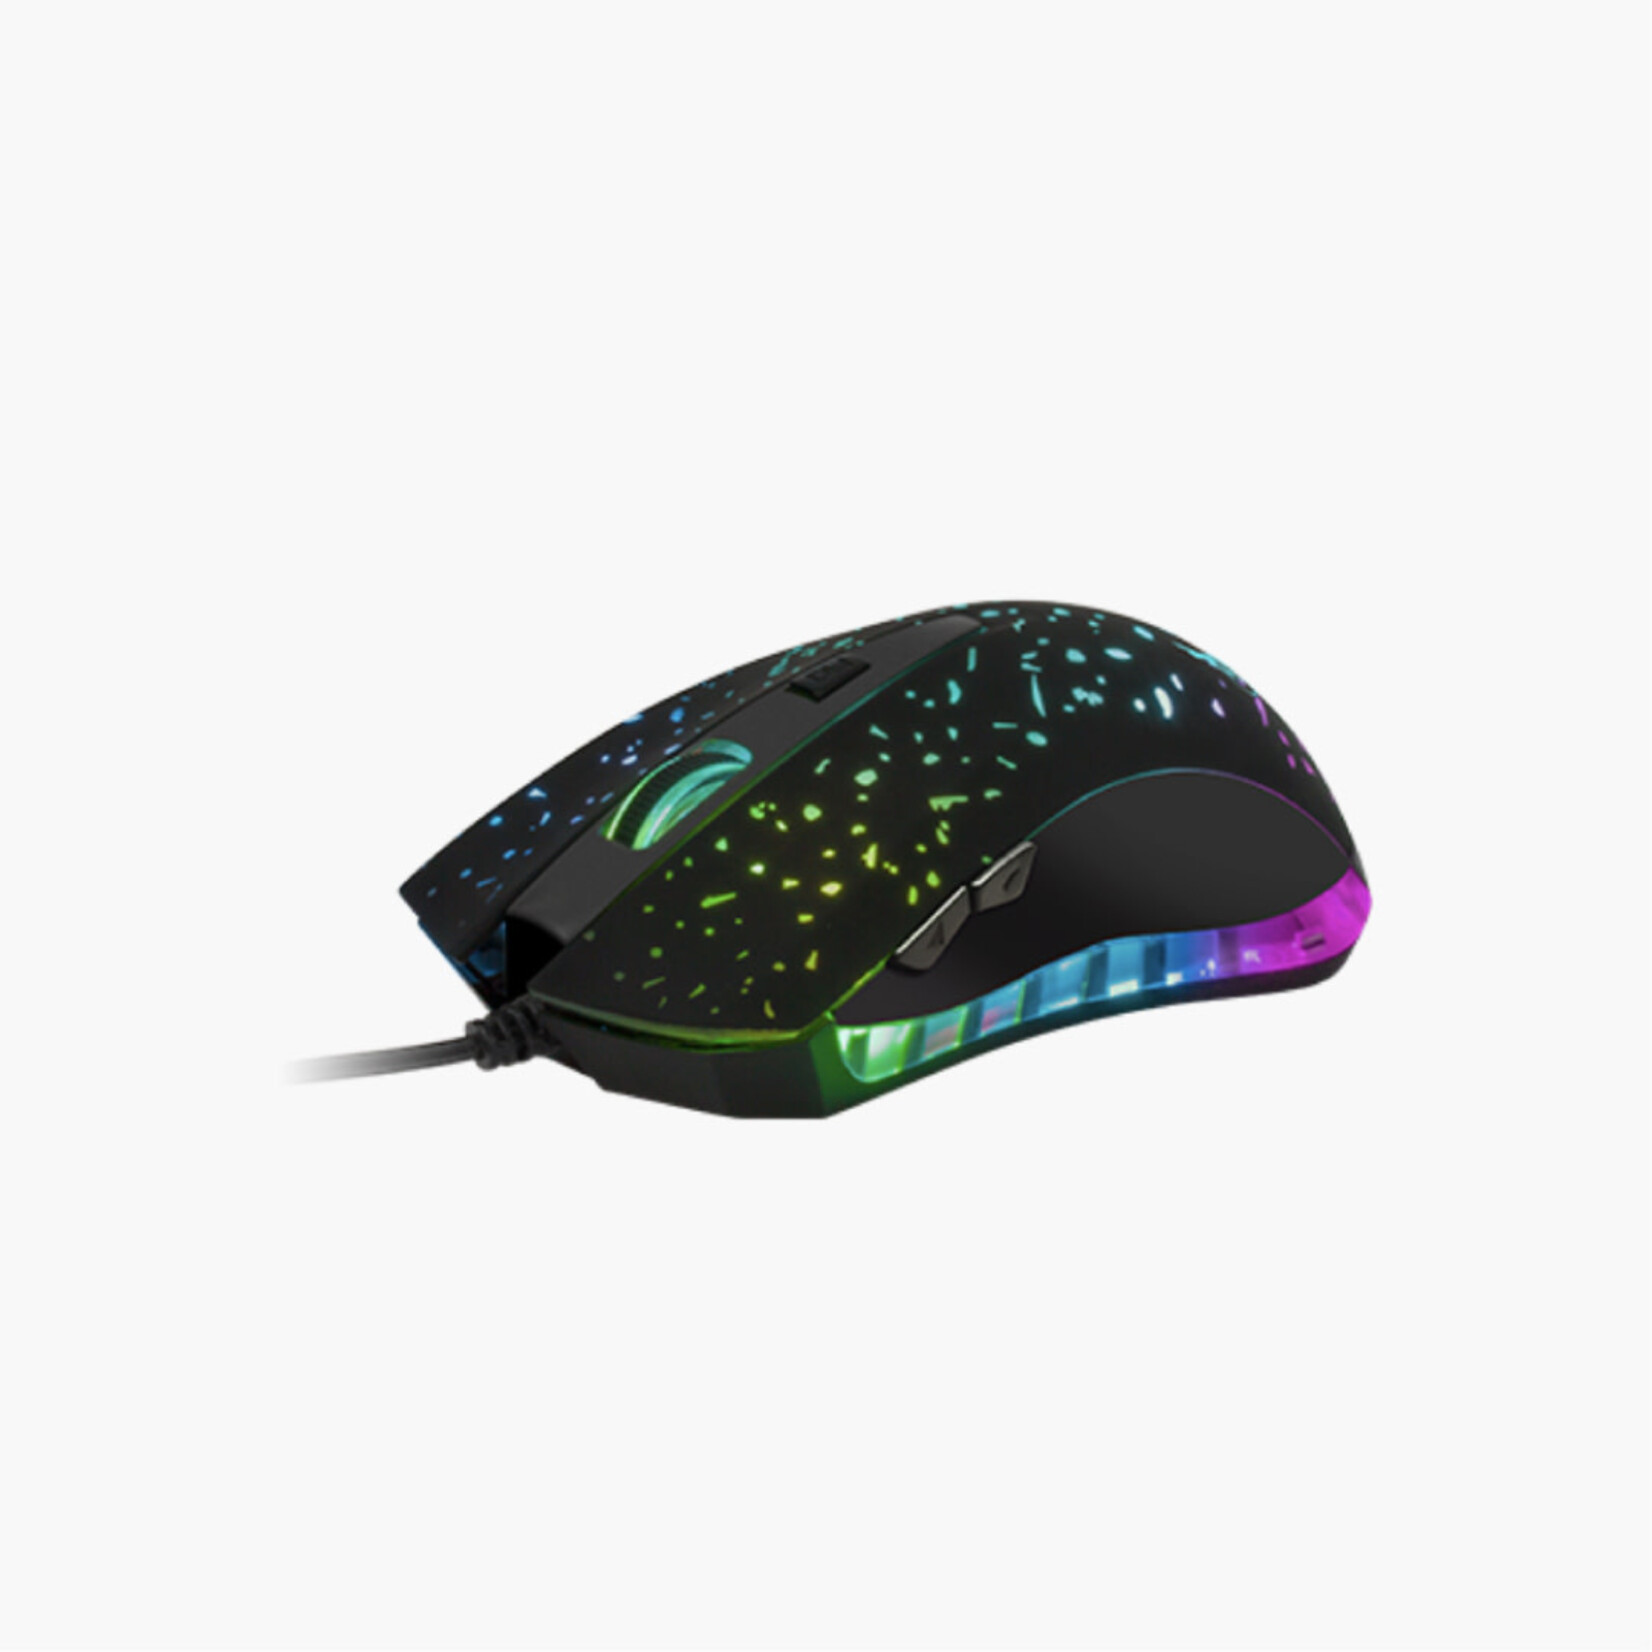 XTech XTech Ophidian Wired Gaming Mouse 6 Button 7 LED